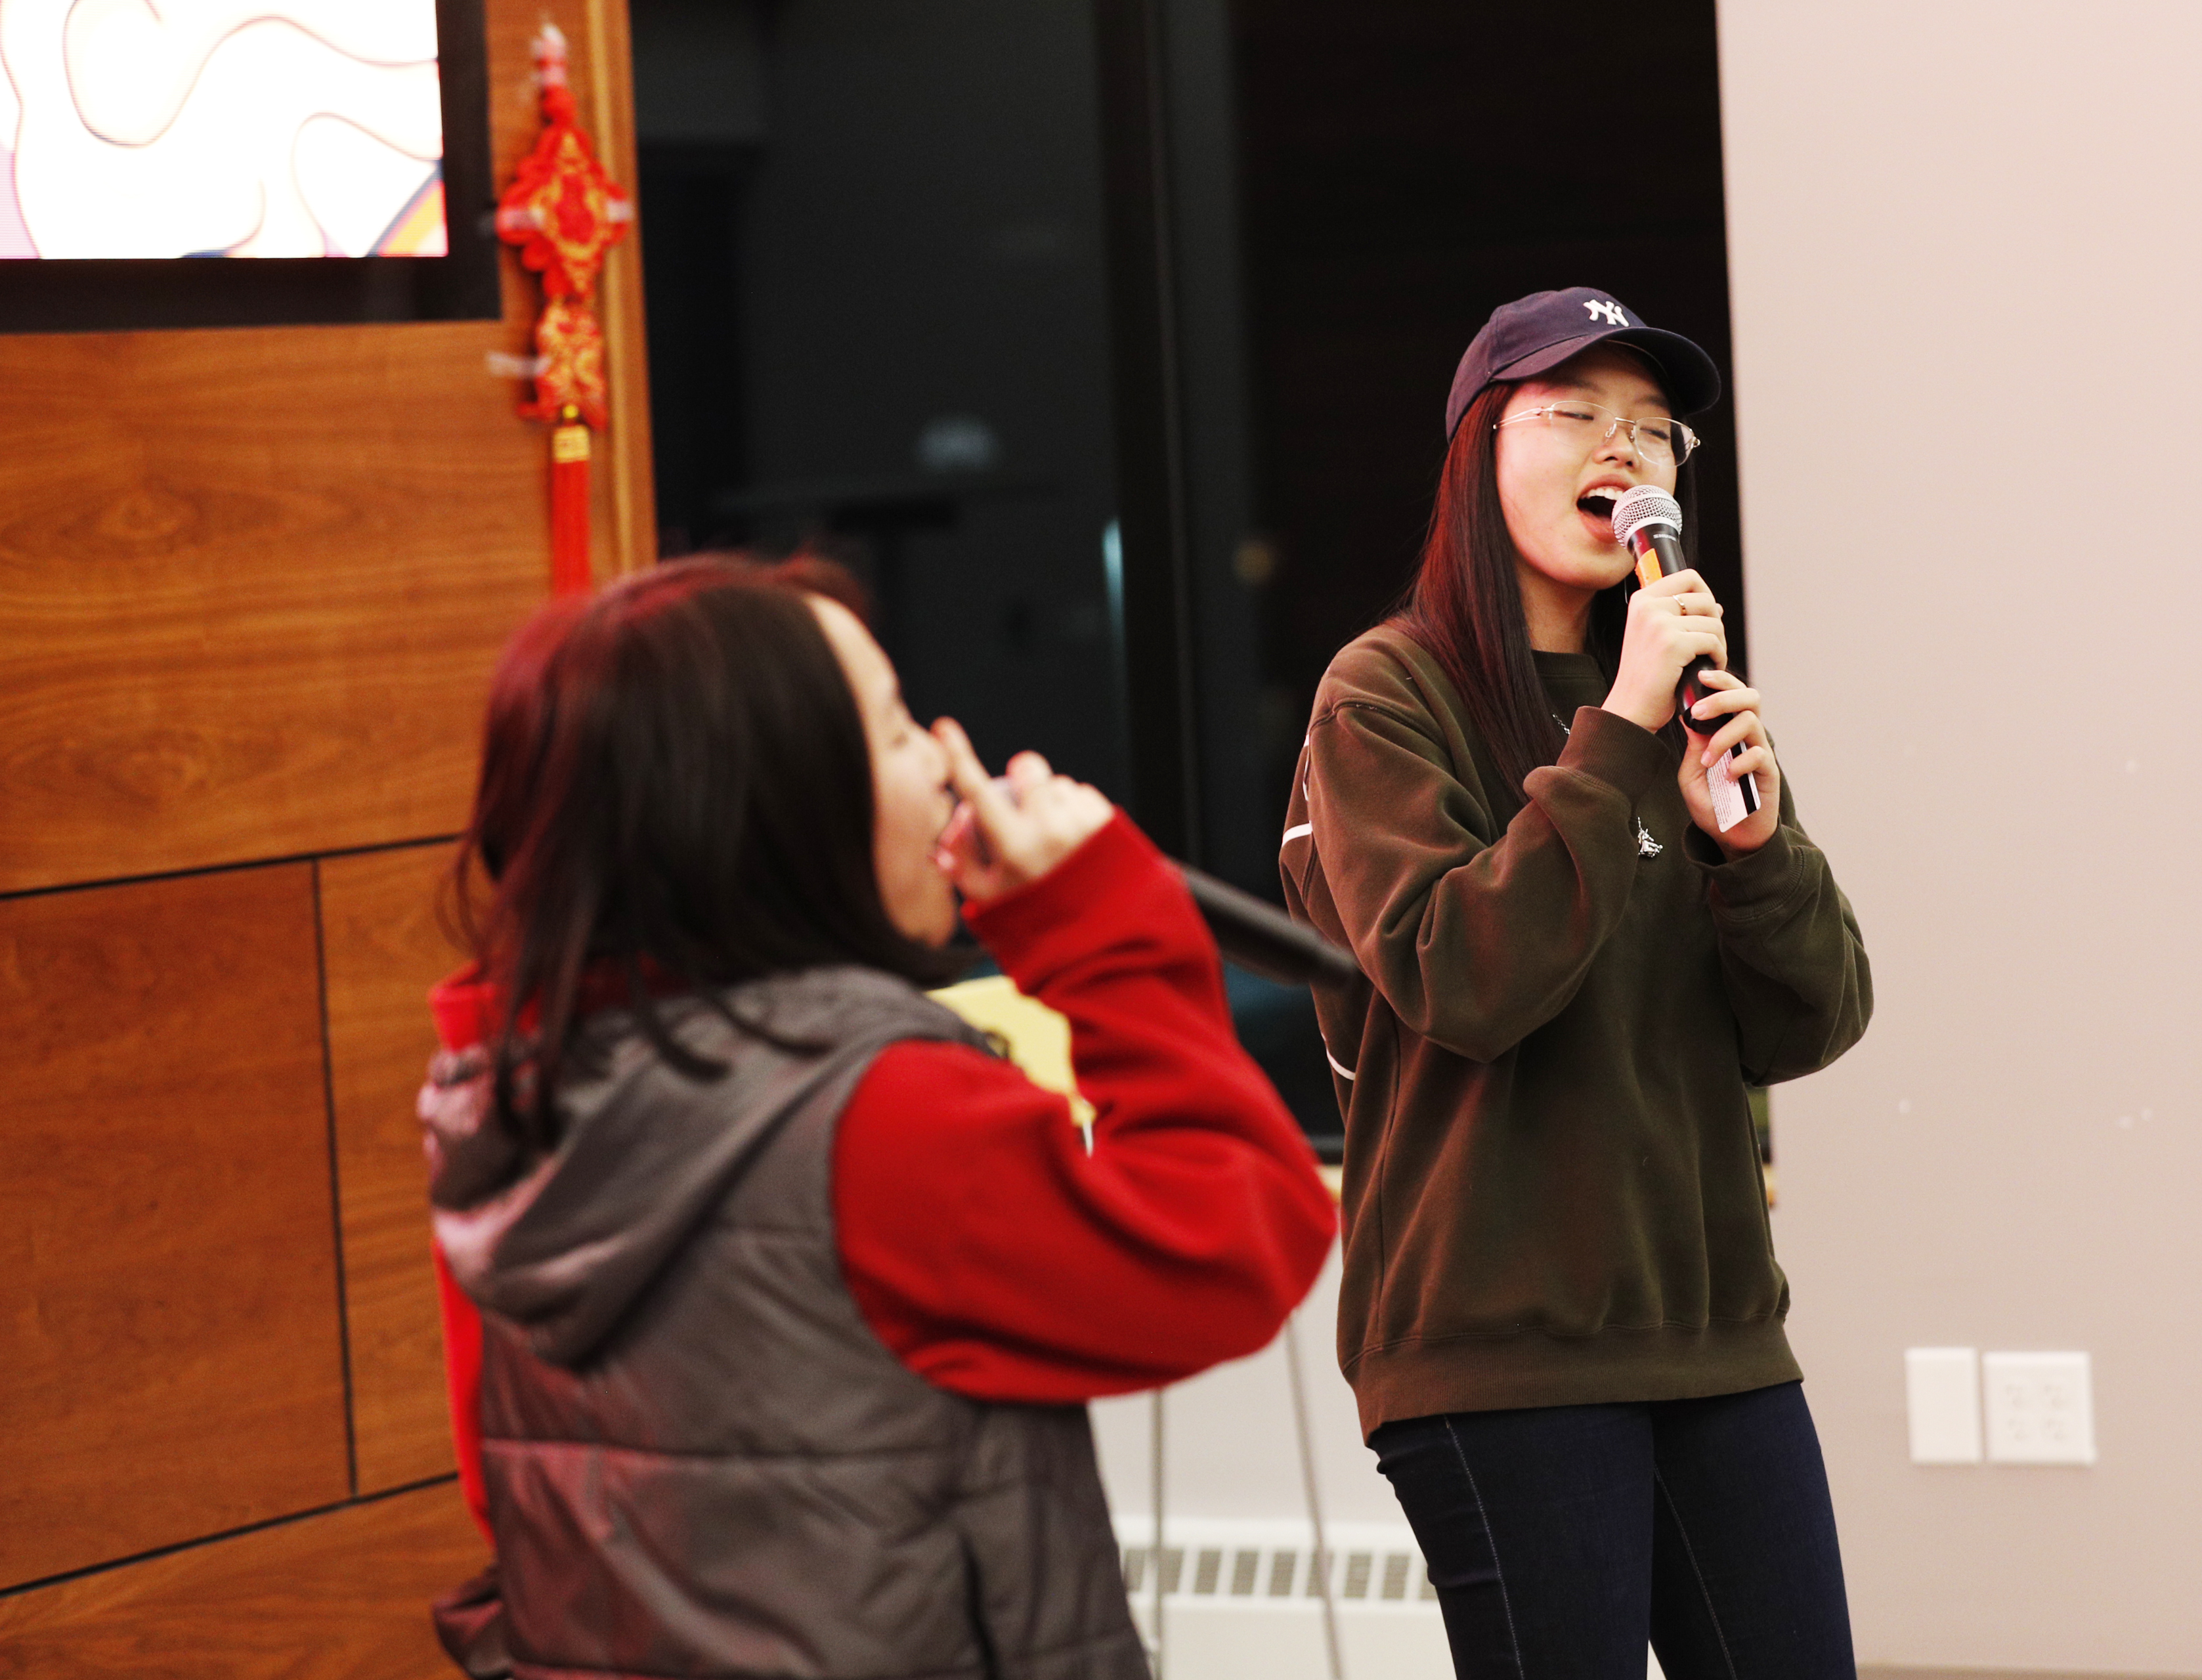   Students perform as part of Lunar New Year celebrations in The Center in late January.  